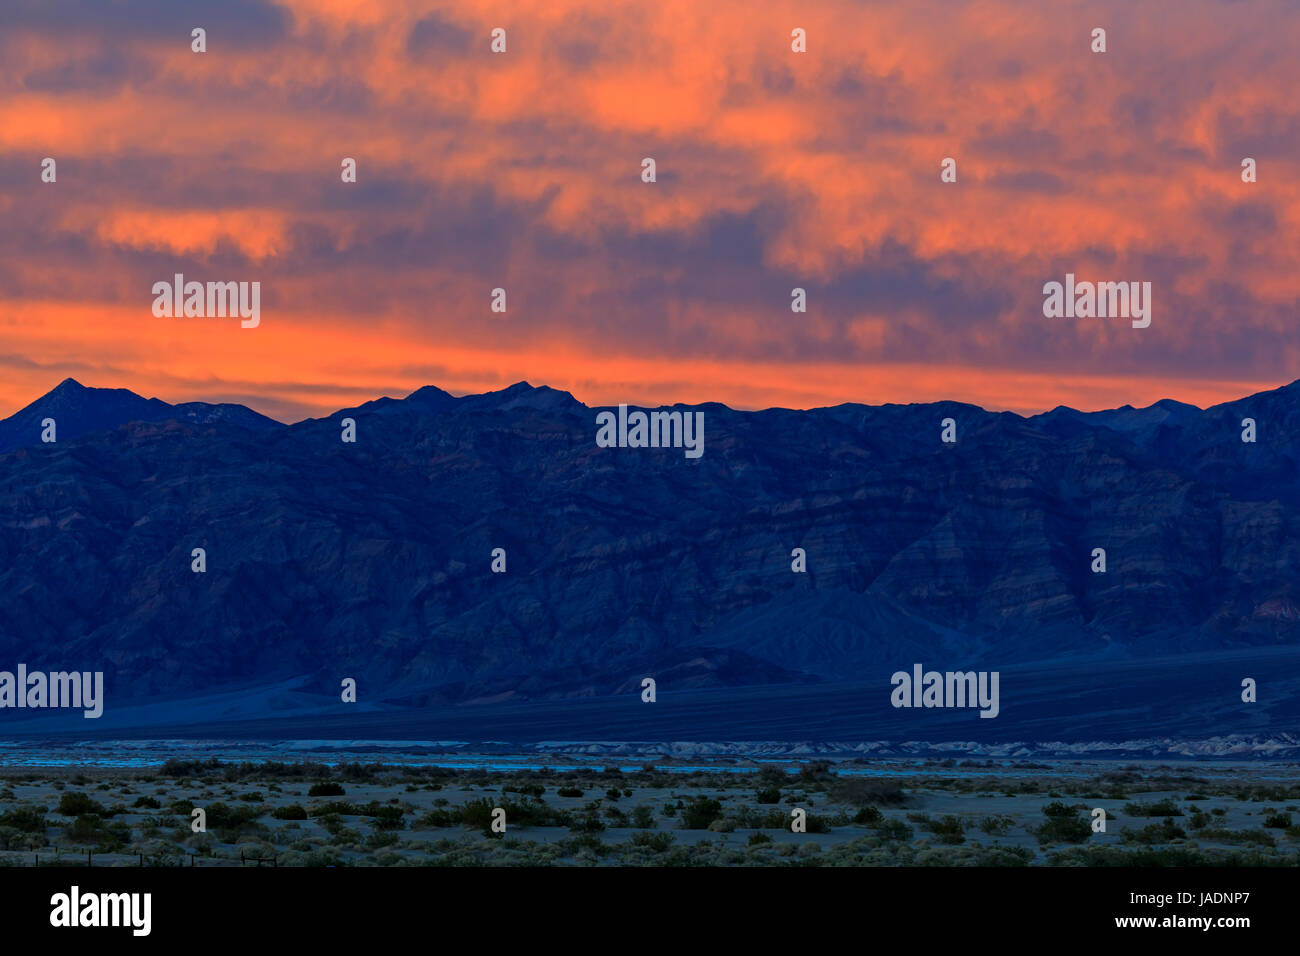 In this shot the afterglow of the sunset lights up the clouds over the Panamint Range on the west side of Death Valley National Park, California, USA. Stock Photo